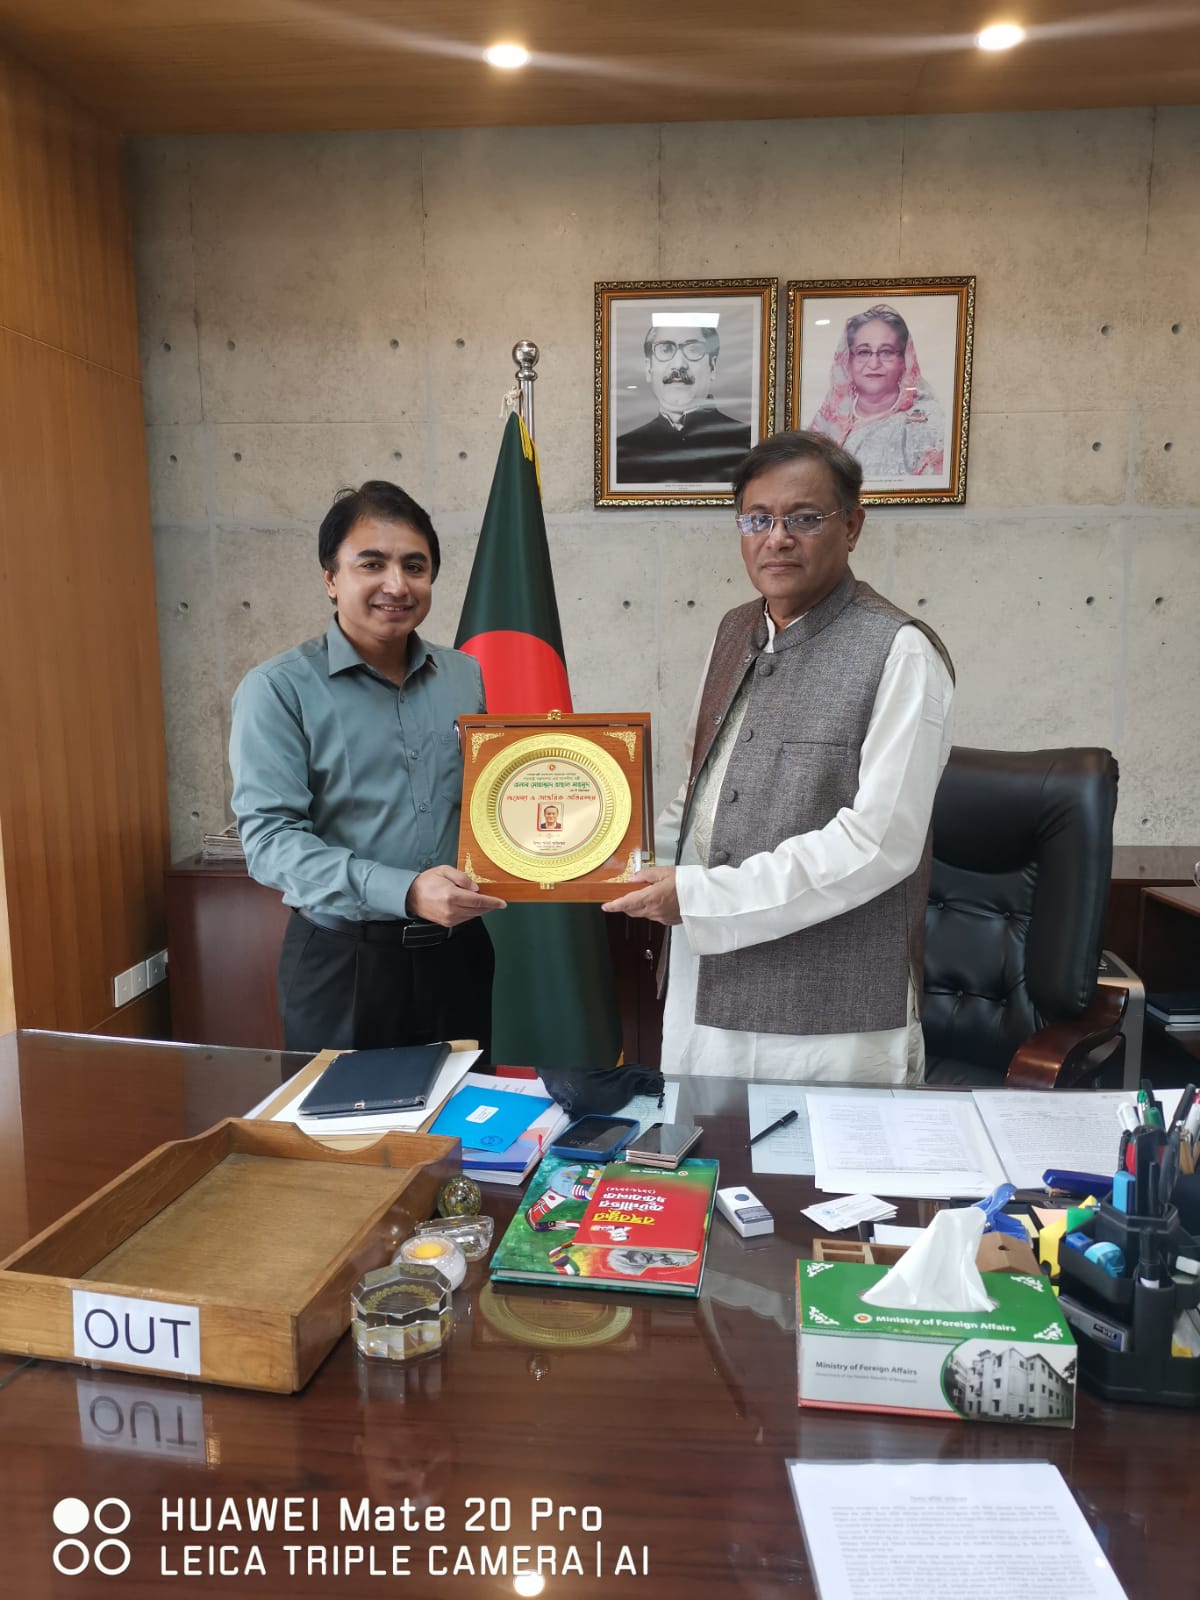 Mr. Md. Golam Rahman, DG of Mission Audit Directorate, has met to congratulate to H.E. Dr. Hasan Mahmud, M.P.​, the Honorable Minister of Ministry of MoFA